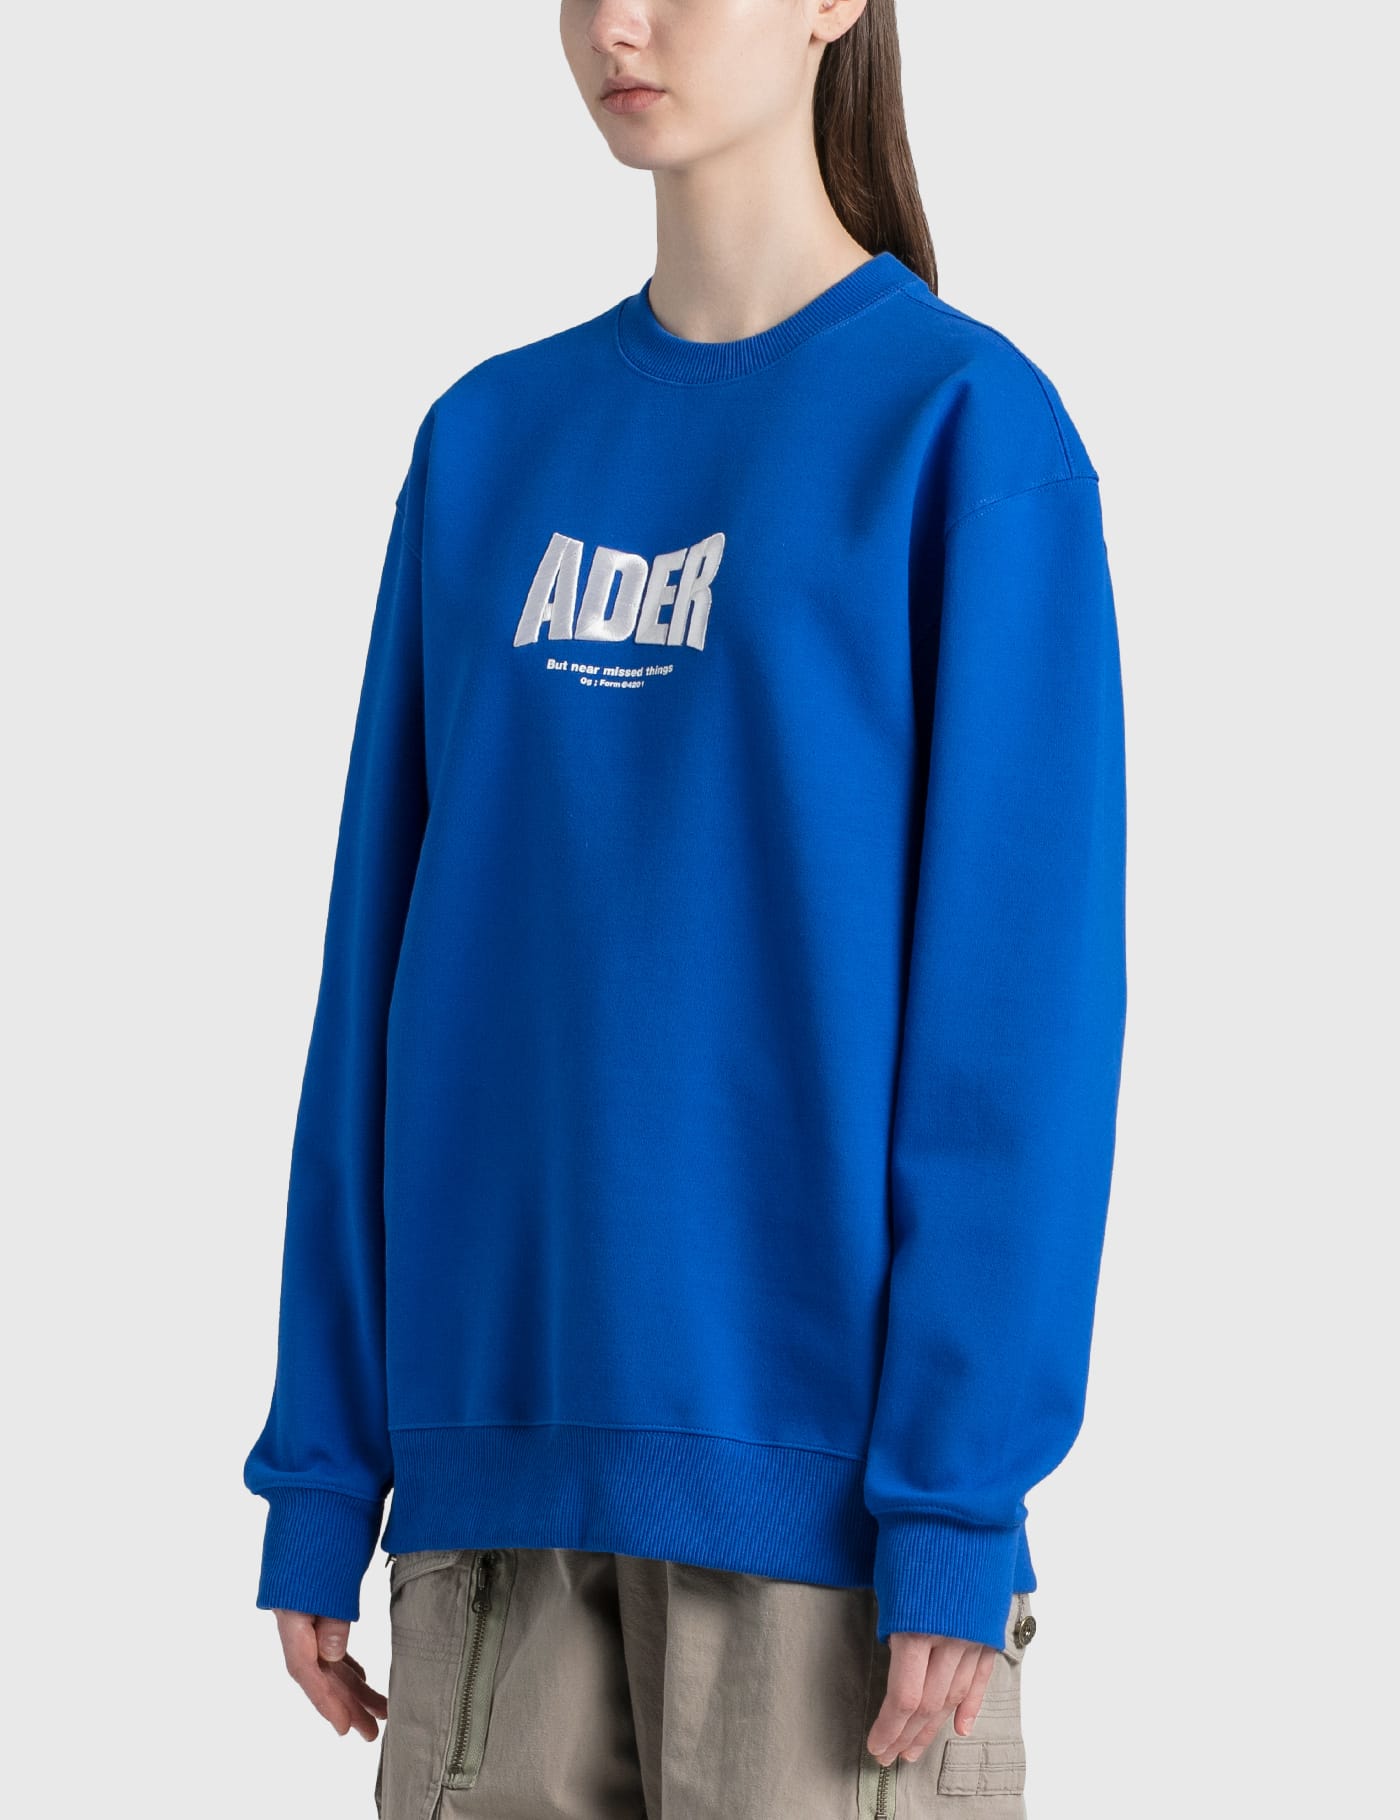 Ader Error - Ader Logo Sweatshirt | HBX - Globally Curated Fashion and  Lifestyle by Hypebeast